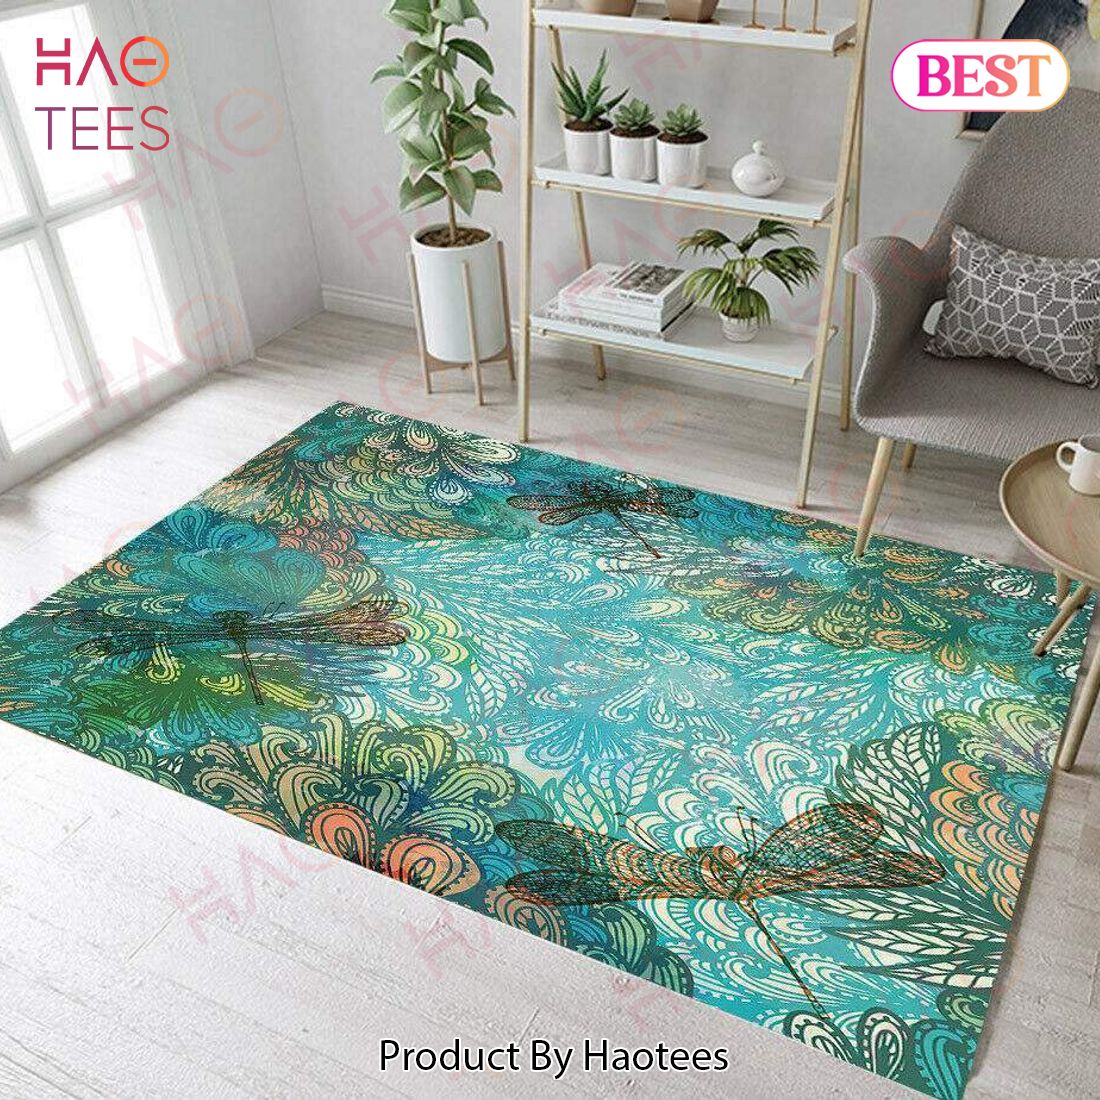 Dragonfly Limited Edition Area Rugs Carpet Mat Kitchen Rugs Floor Decor - ZK01